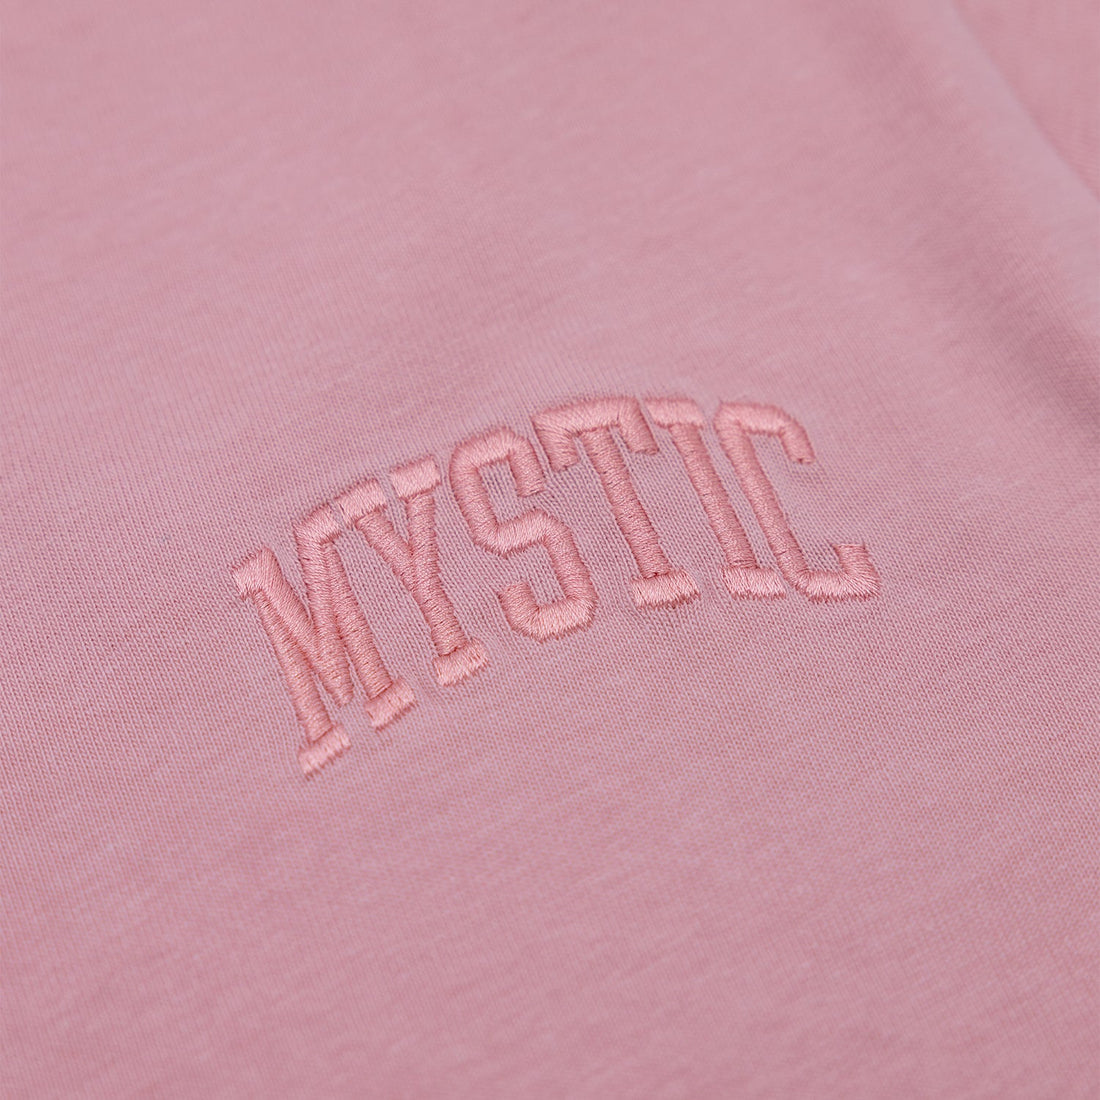 Mystic Embroidered Heavyweight Tonal T-Shirt in Light Blue